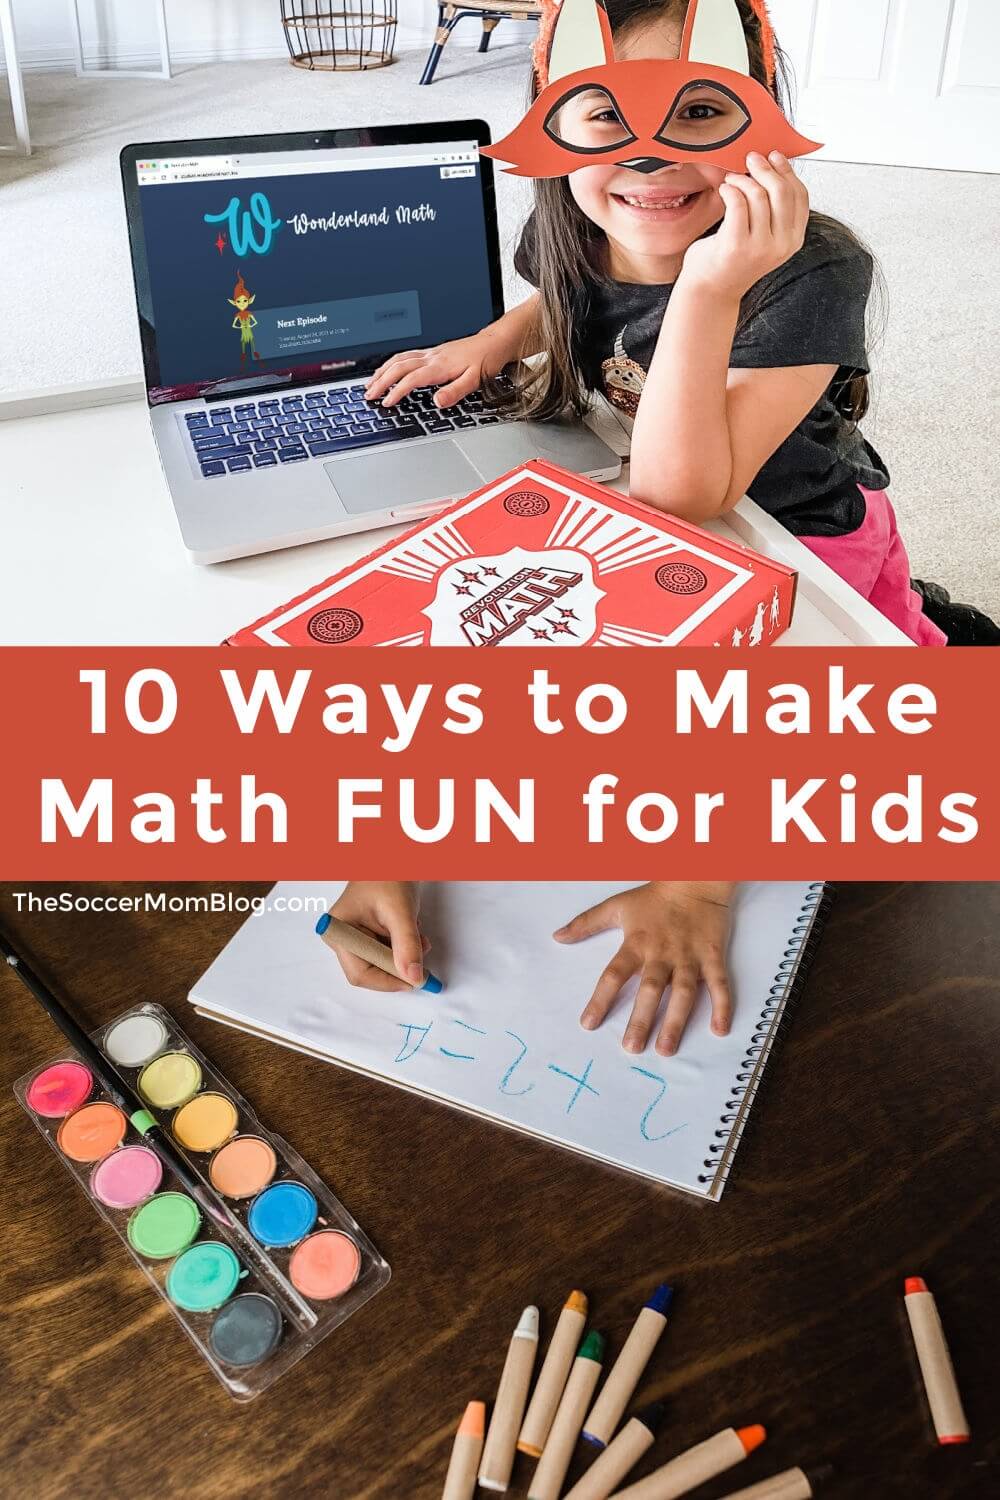 kids practicing math at home; text overlay "10 Ways to Make Math FUN for Kids"